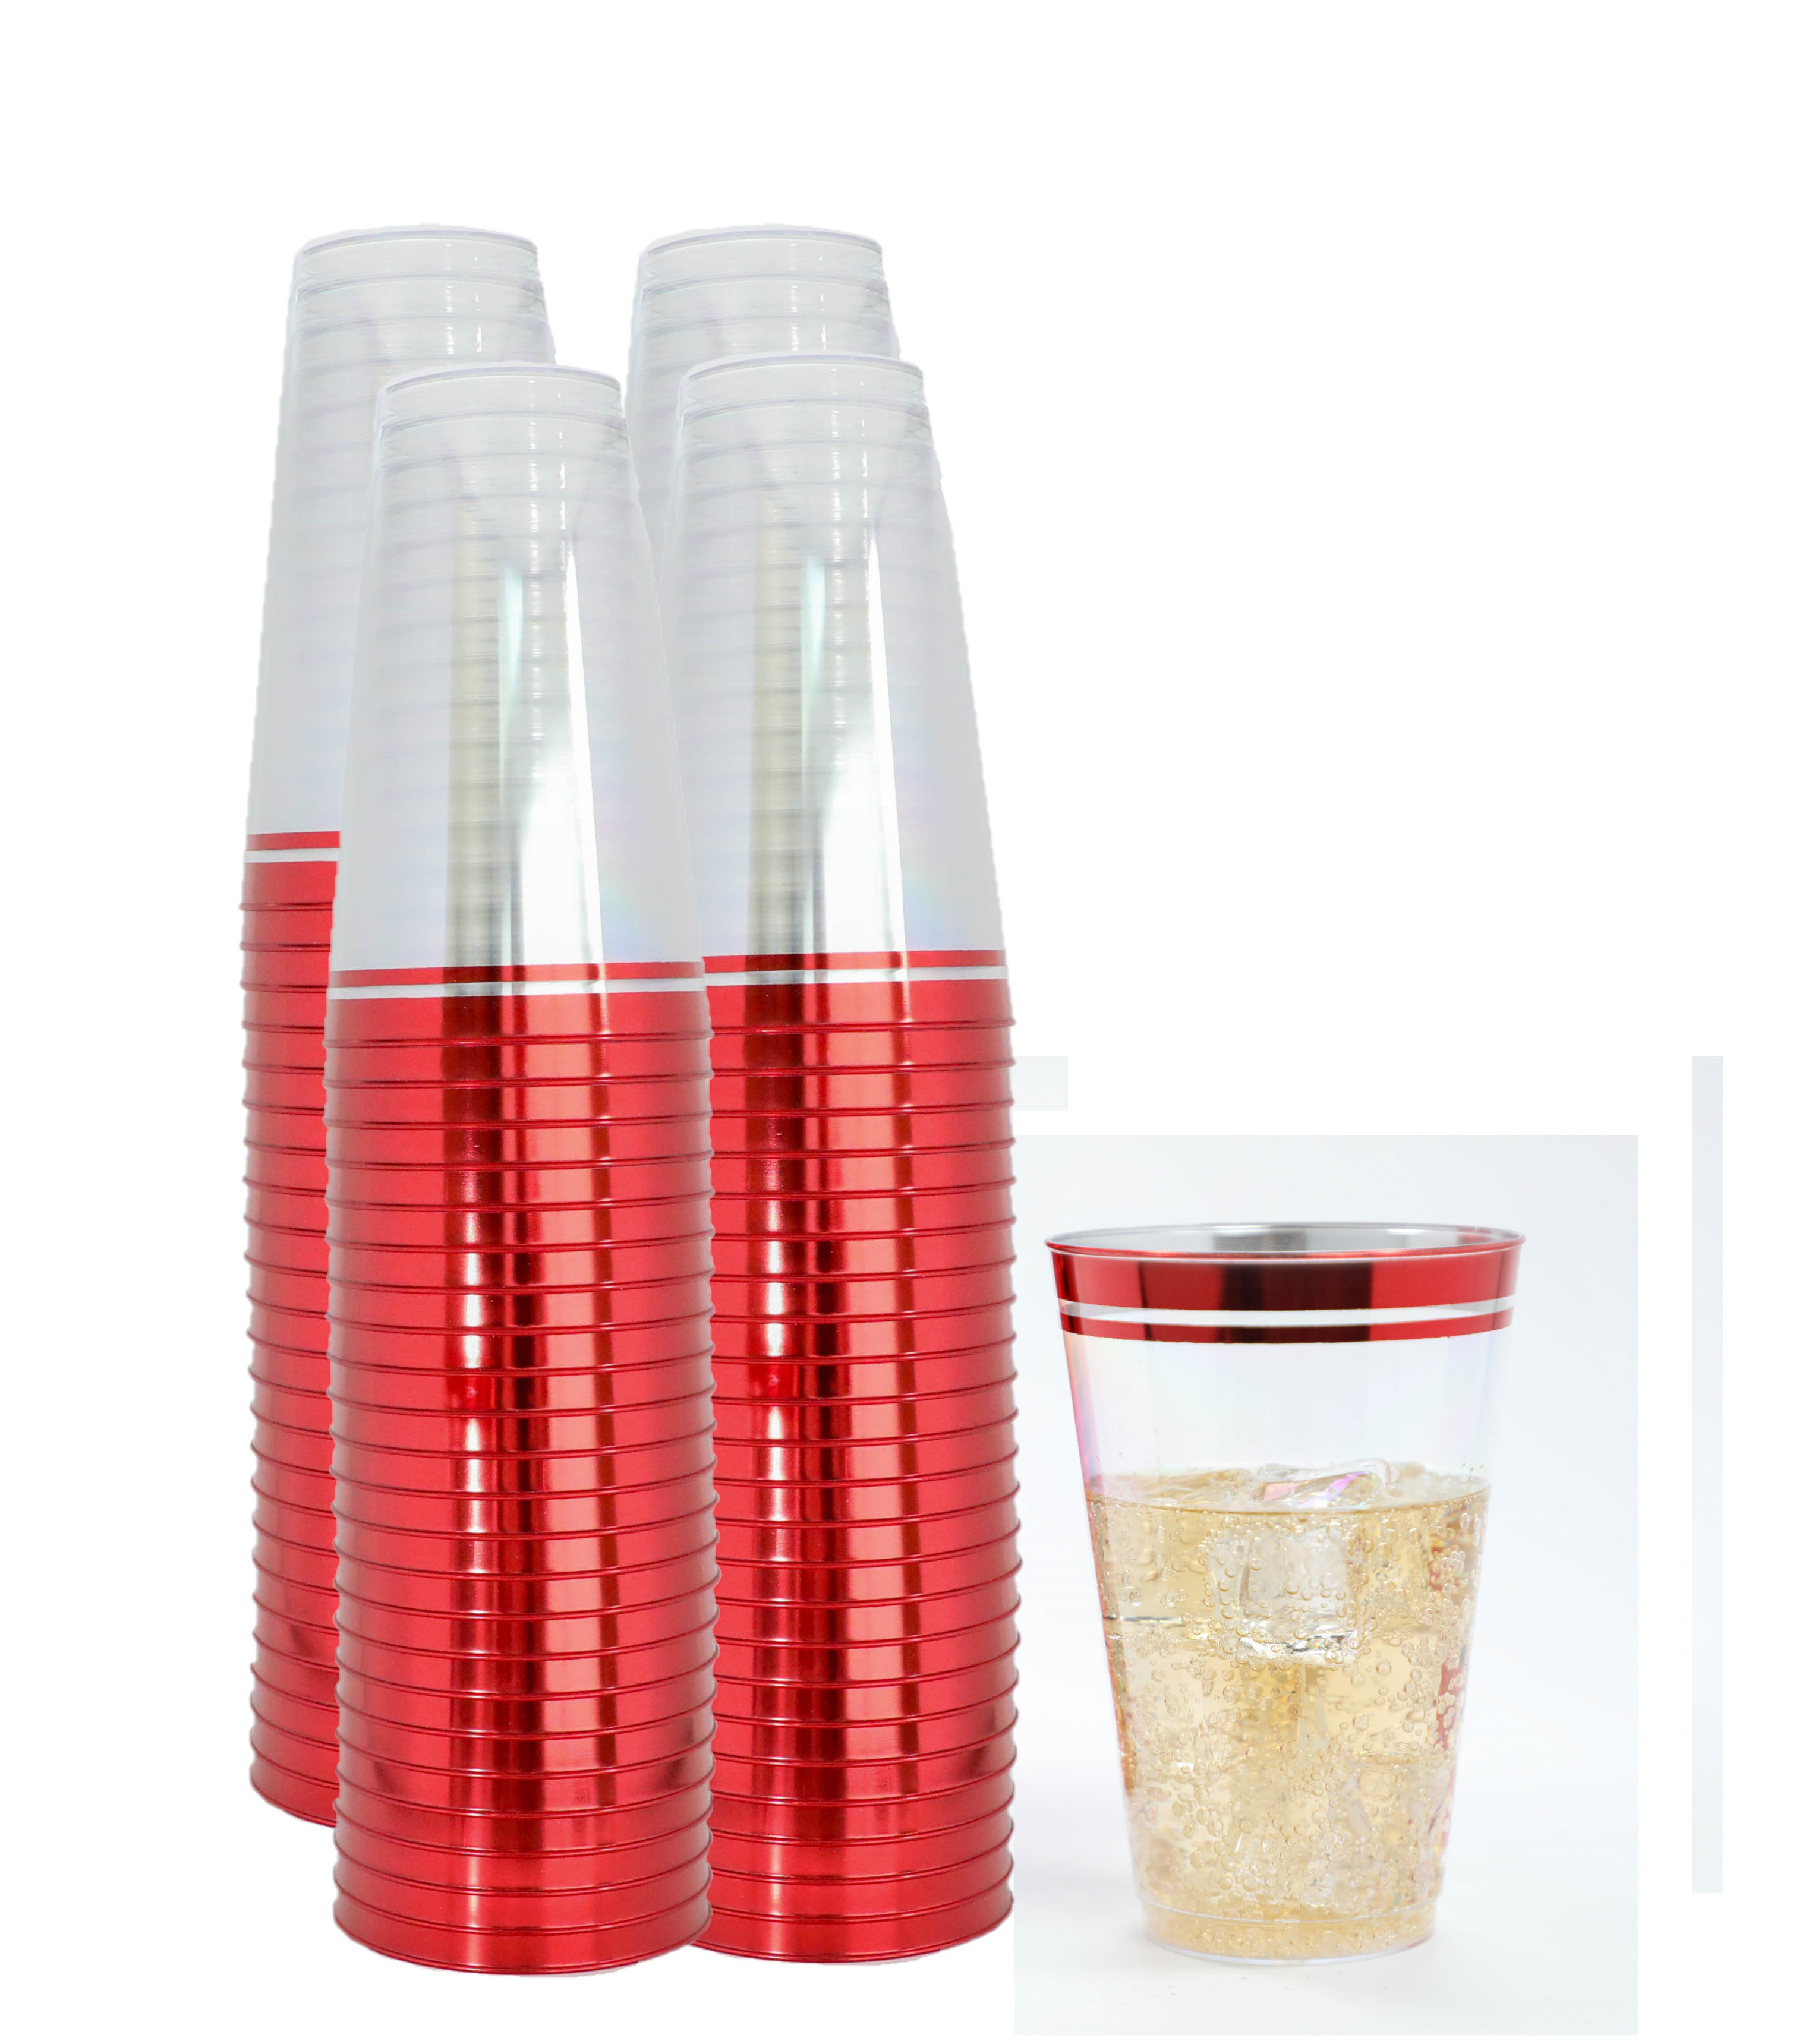 Hefty Party On Plastic Cups, Holiday Assorted Colors, 16 Ounce